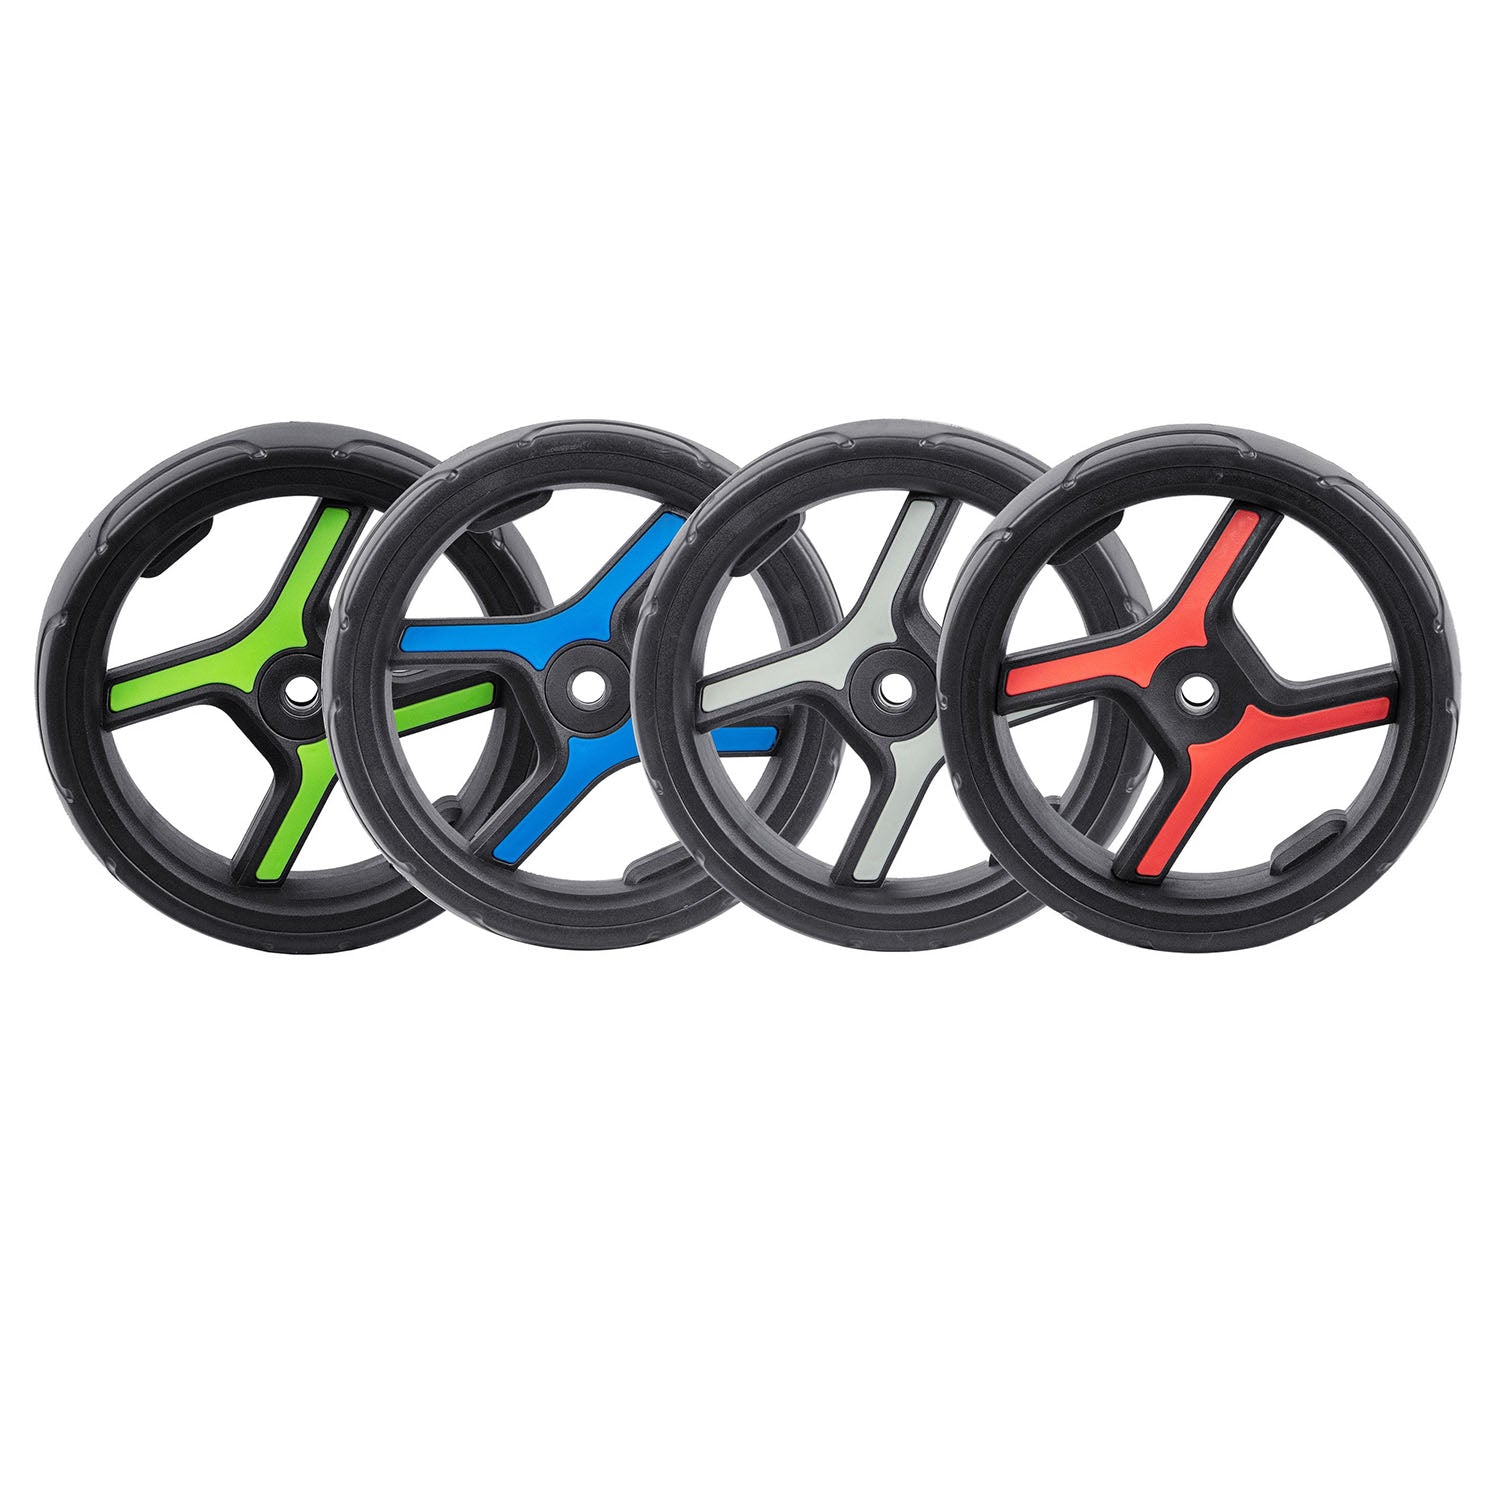 Axglo V2 Front Wheel - four colors